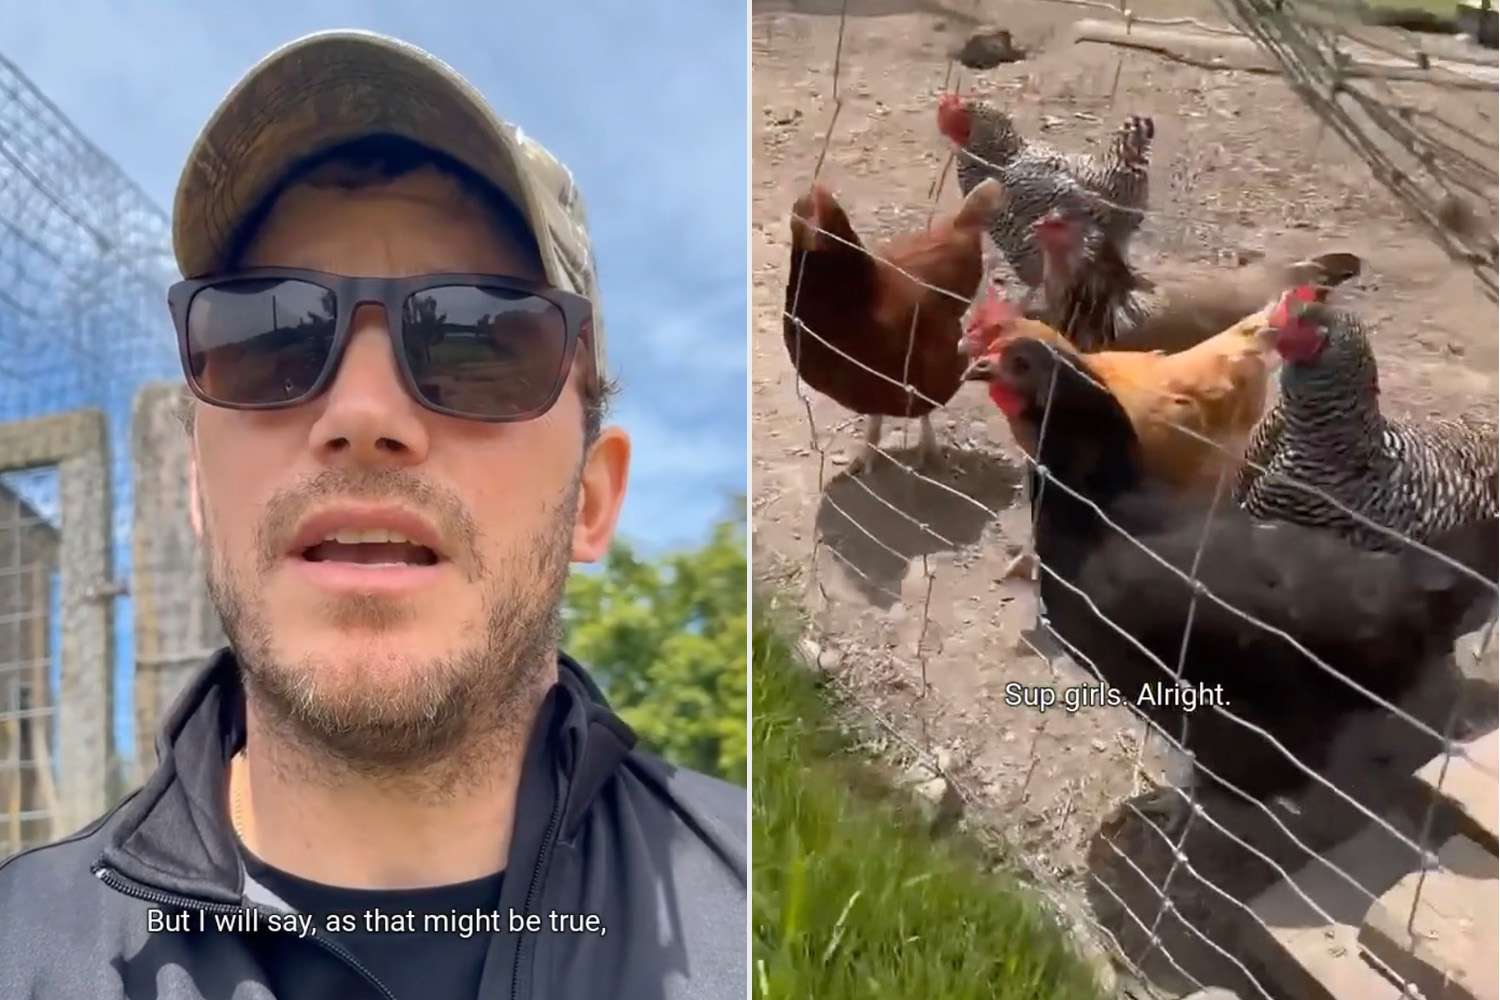 Chris Pratt Hangs Out with His Chickens on Washington State Ranch [Video]